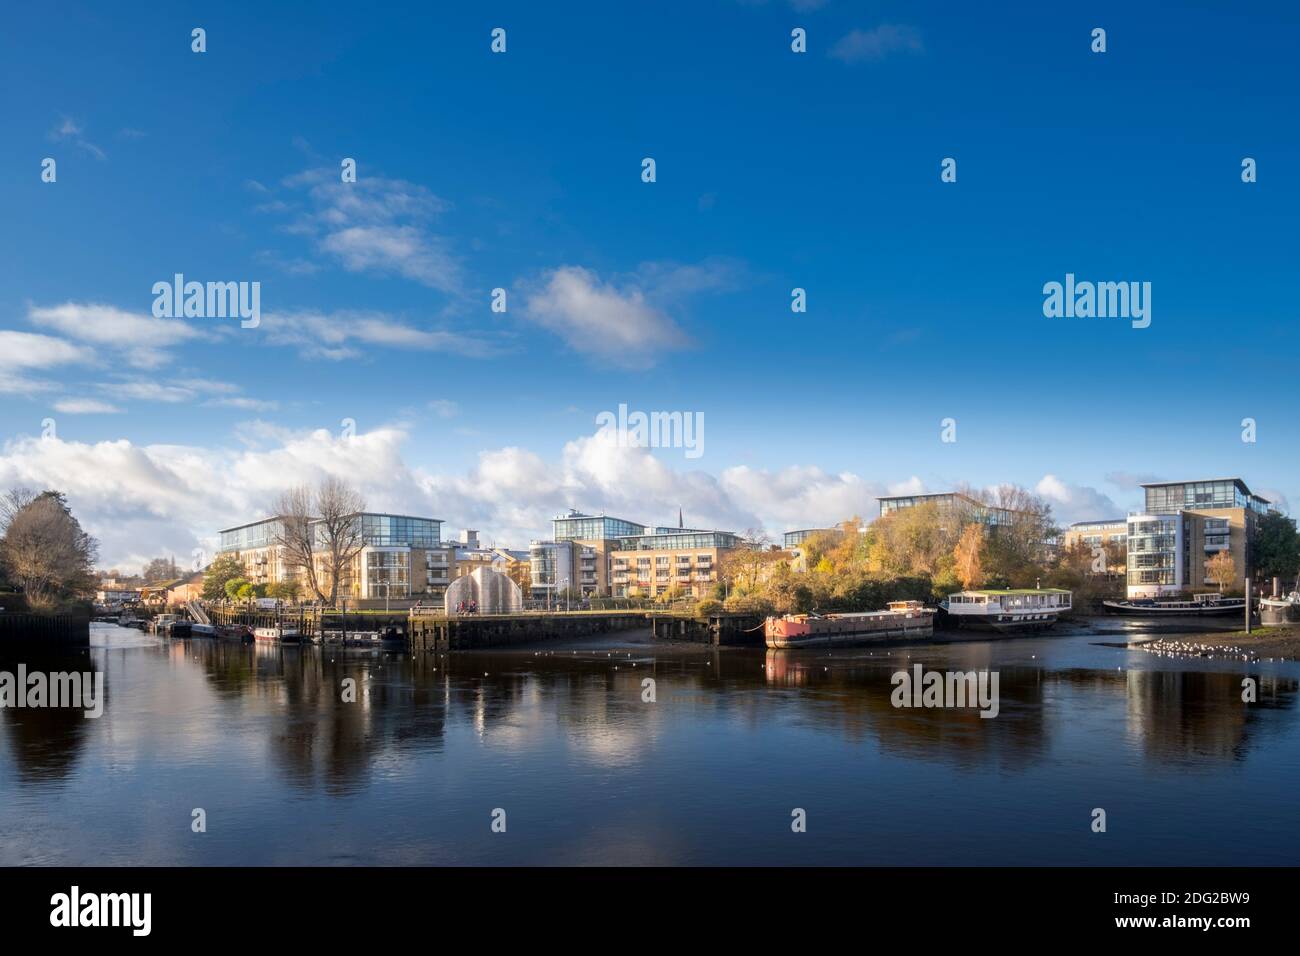 London, Hounslow, Brentford, Brentford Dock & mooring basin, mouth of the River Brent at the confluence of Thames, residential & commercial buildings Stock Photo